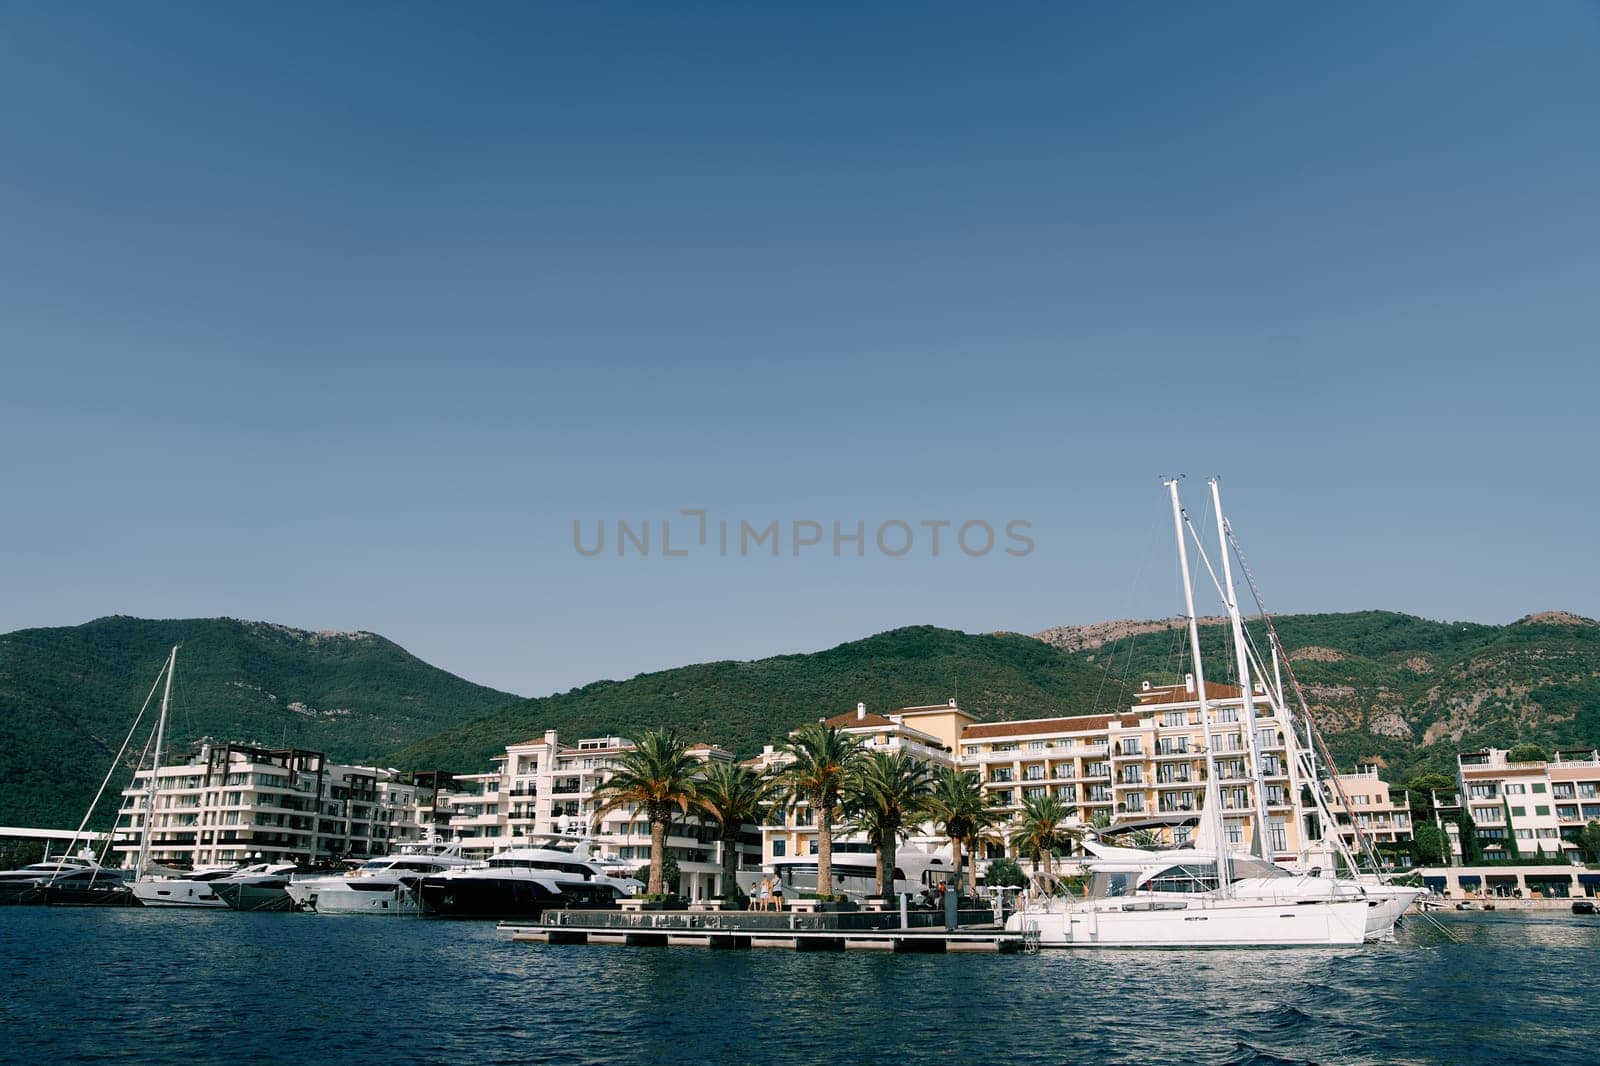 Motor yachts are moored along the pier opposite the Regent Hotel. Porto, Montenegro by Nadtochiy